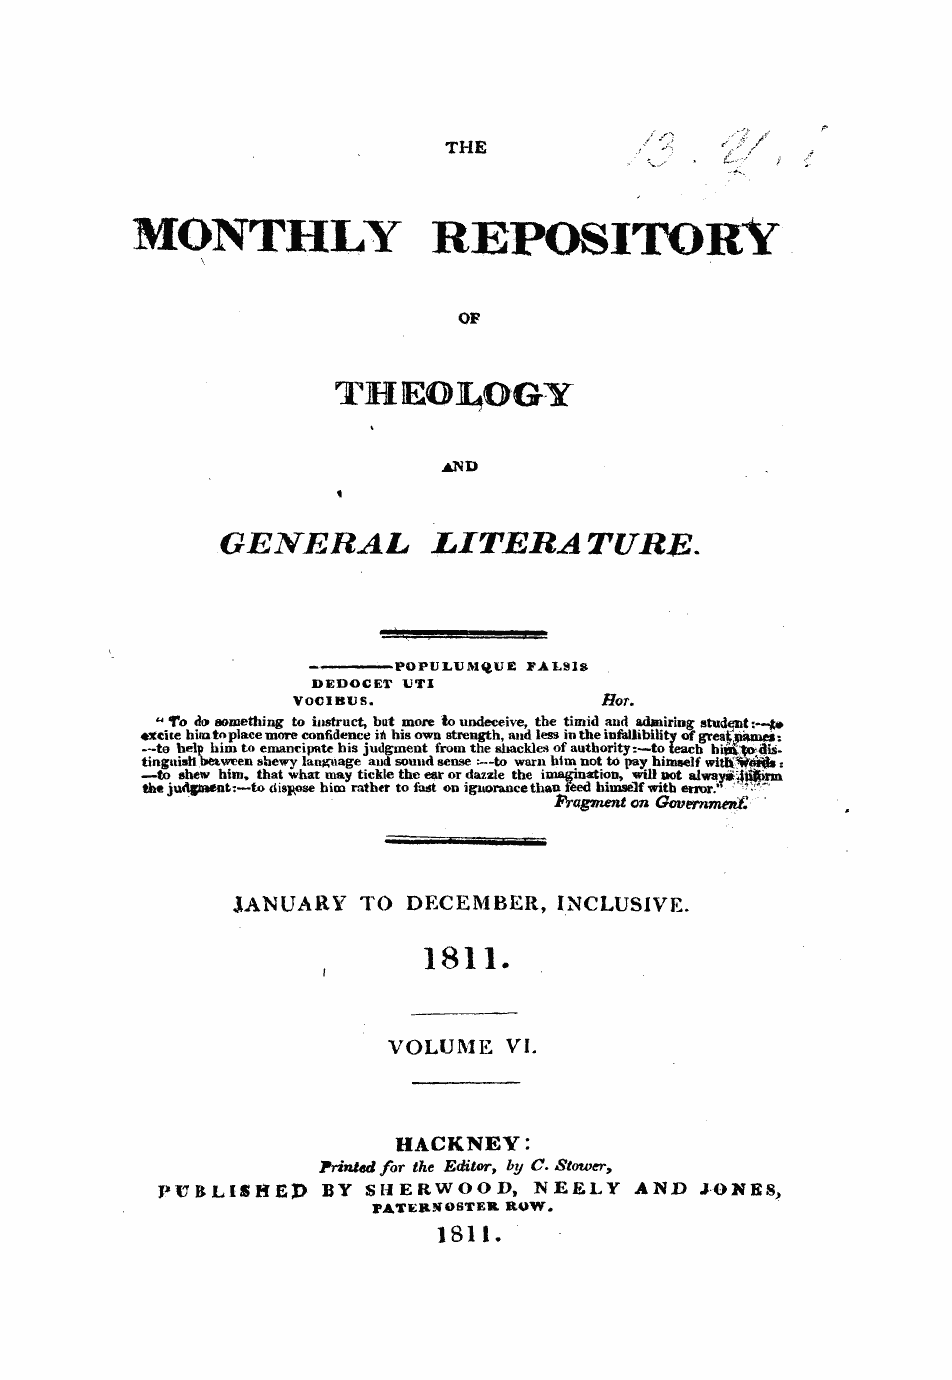 Monthly Repository (1806-1838) and Unitarian Chronicle (1832-1833): F Y, 1st edition, Front matter - Untitled Article